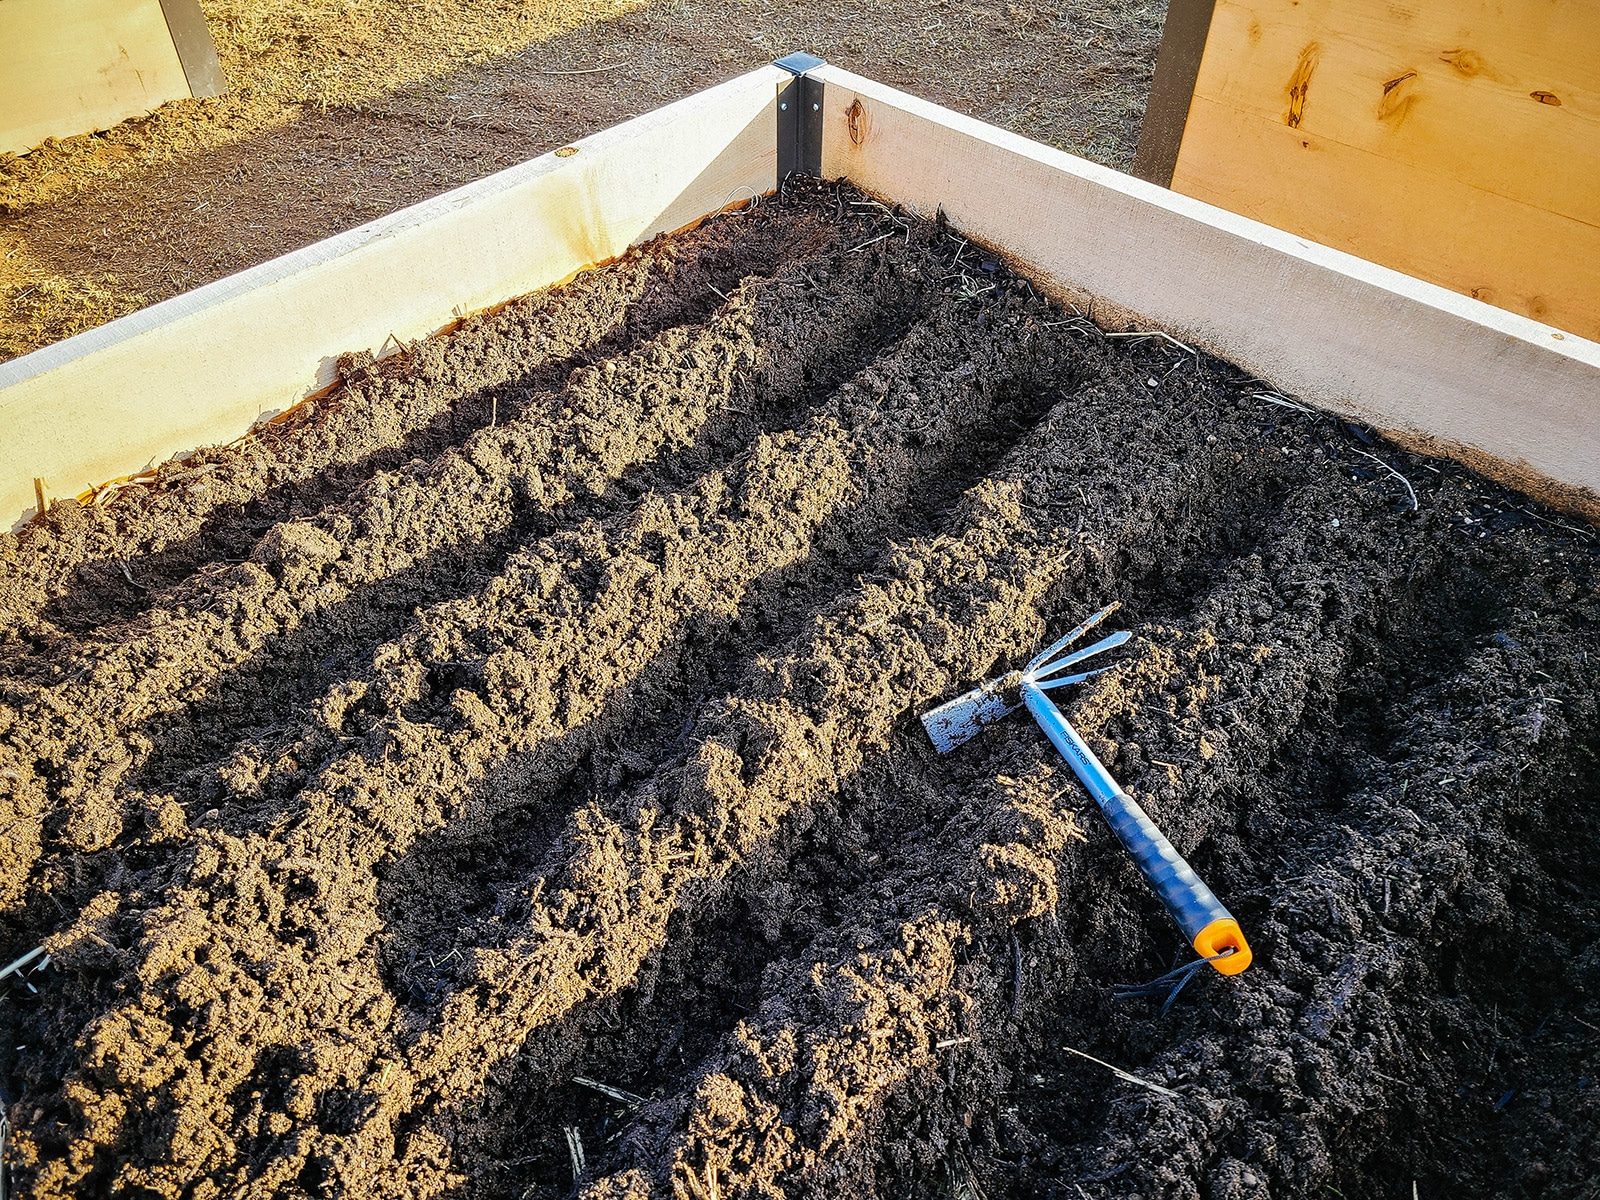 A cultivator tool resting on rows of furrows made in a raised bed